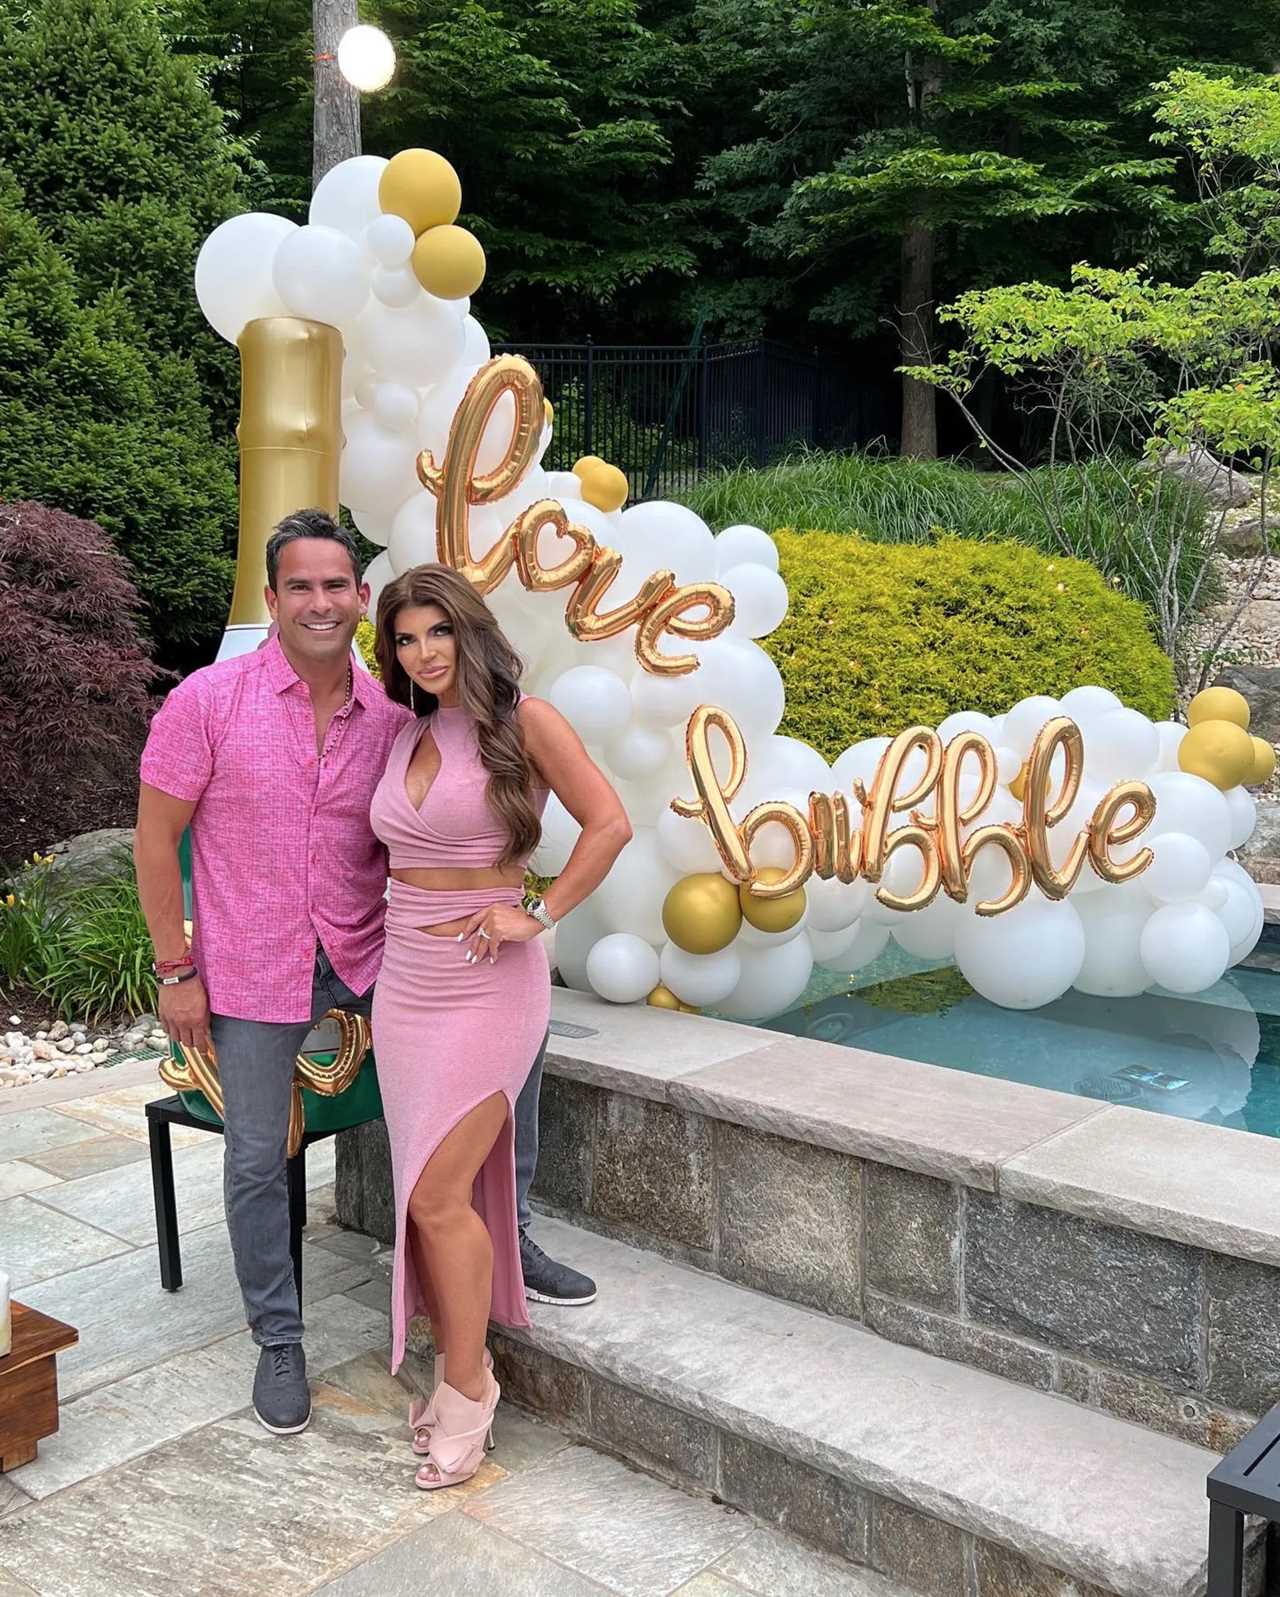 RHONJ’s Teresa Giudice adds TWO more bridesmaids to her wedding party from the cast- but one costar is still left out